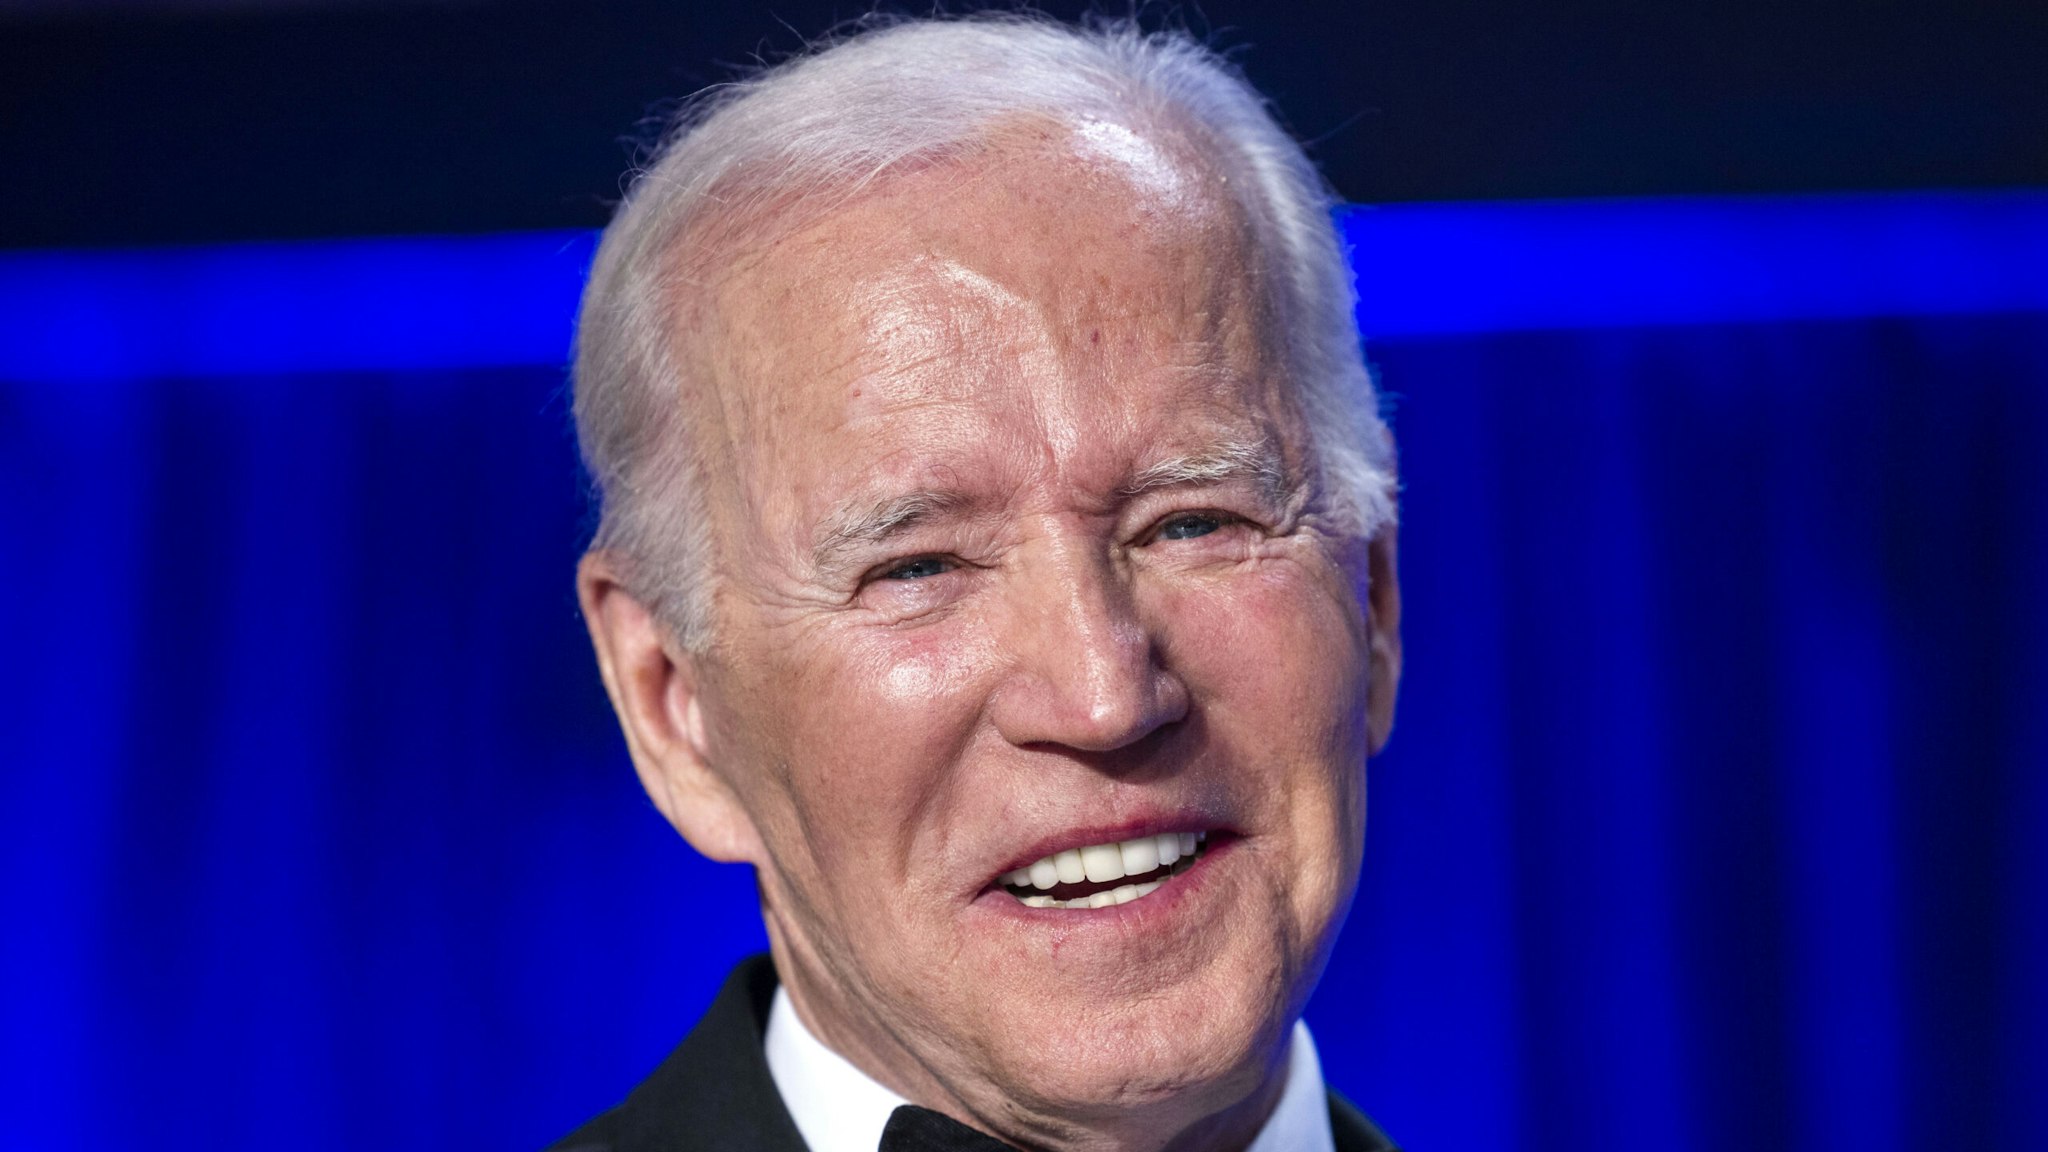 U.S. President Joe Biden attends the White House Correspondents' Association (WHCA) dinner in Washington, D.C., U.S., on Saturday, April 30, 2022. The annual dinner raises money for WHCA scholarships and honors the recipients of the organization's journalism awards.